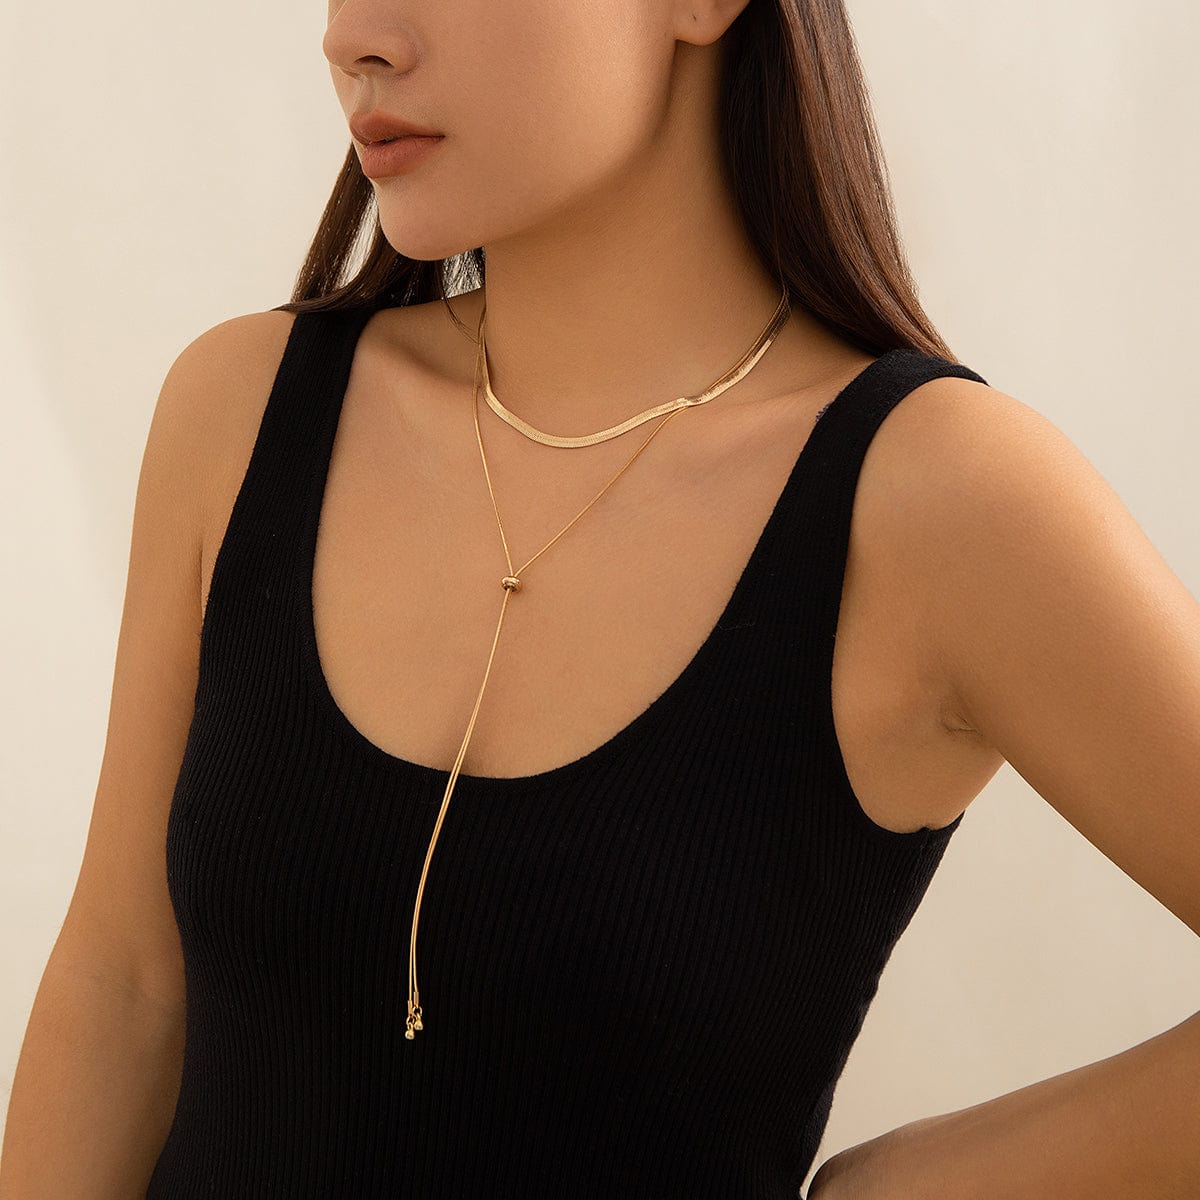 Chic Layered Gold Silver Plated Adjustable Snake Chain Y Necklace - ArtGalleryZen